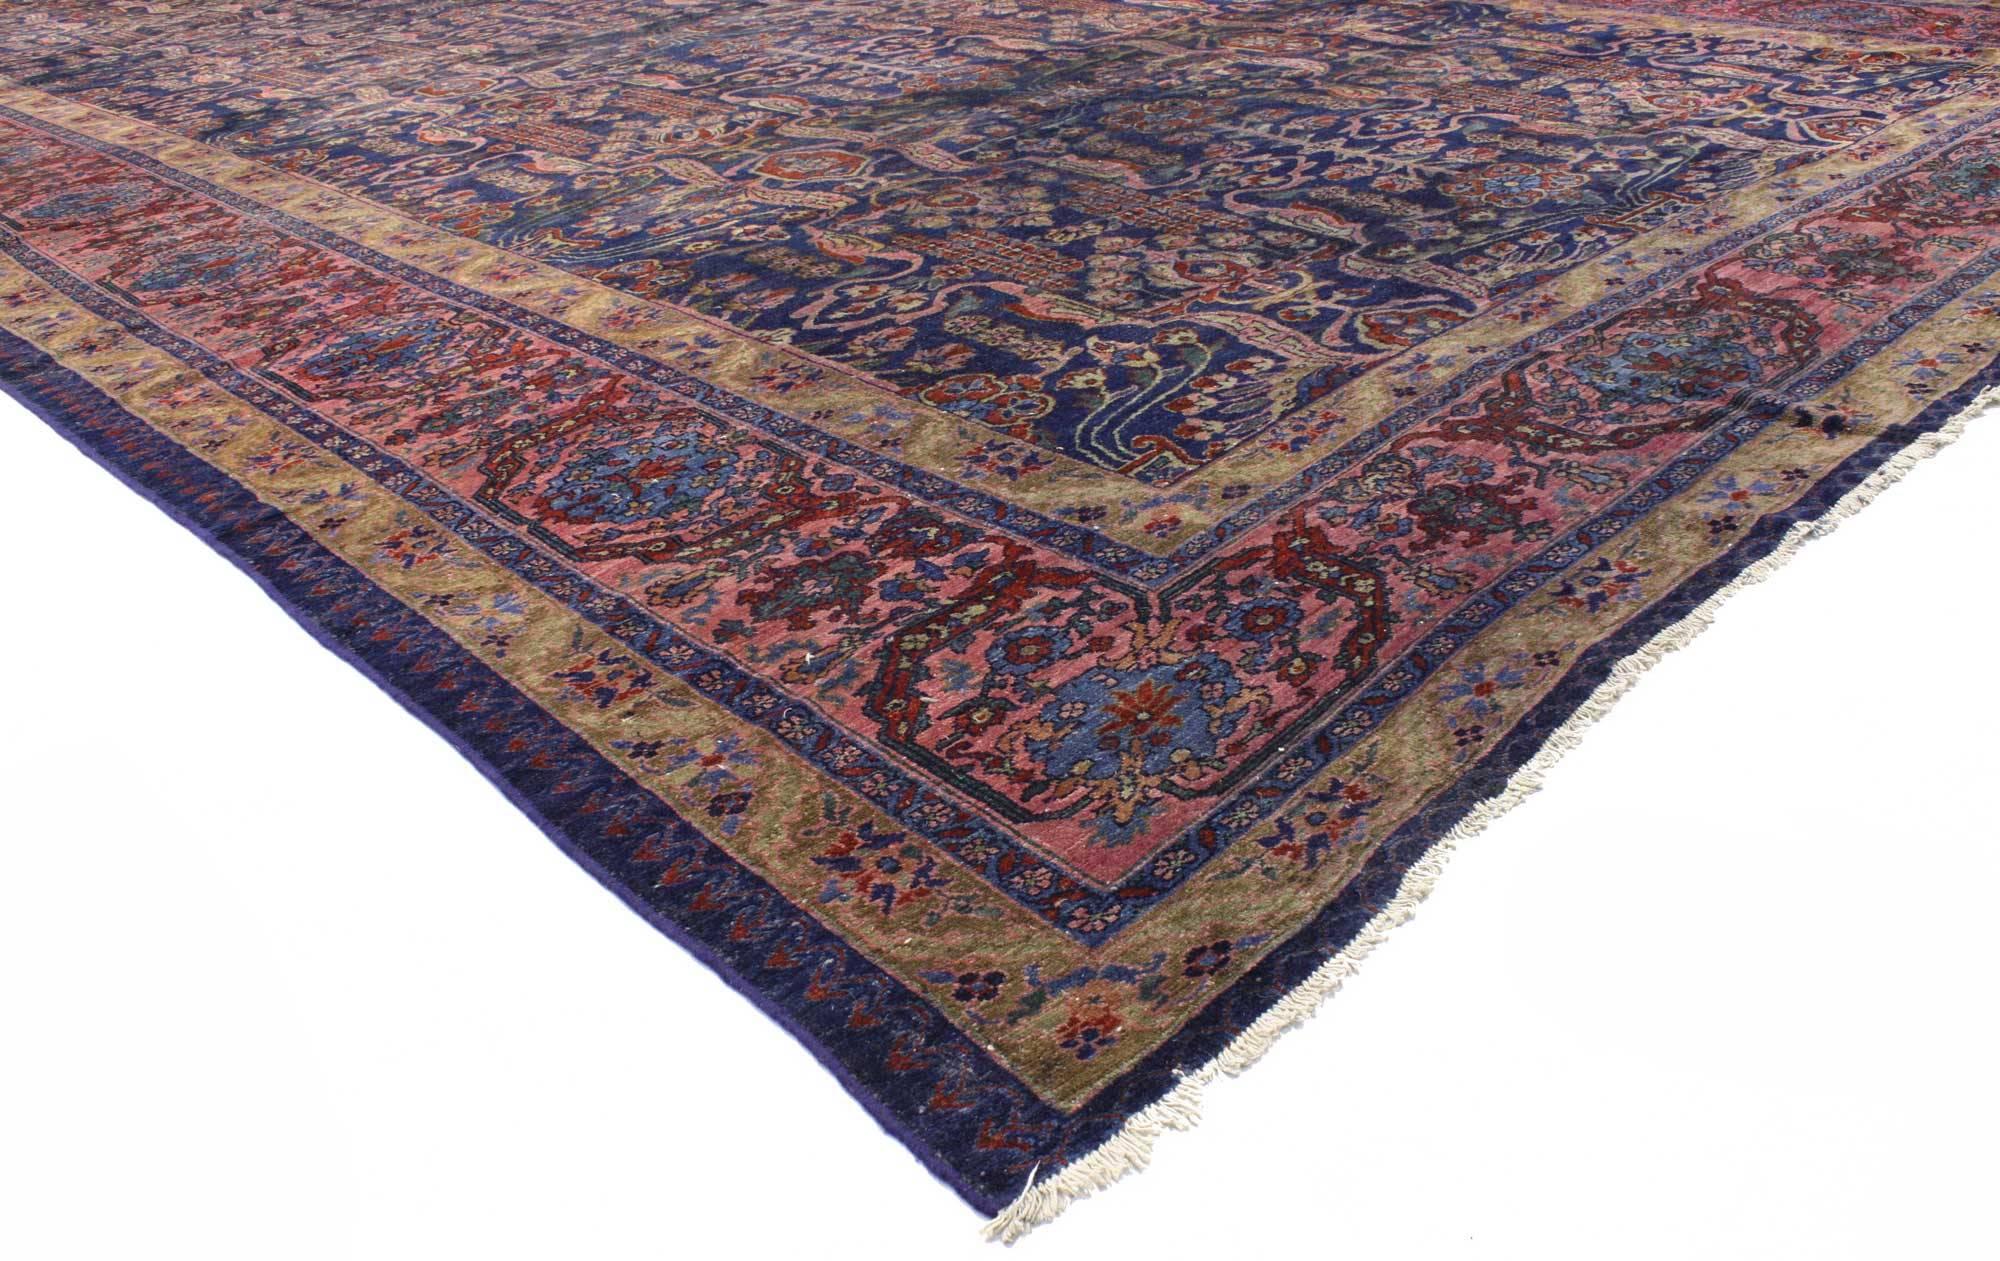 71615 Distressed Antique Bibikabad Persian Rug 11'06 X 24'00. Effortless beauty with rustic sensibility, this hand-knotted wool antique Persian rug is poised to impress. The lovingly time-worn navy blue field features an allover repeating botanical